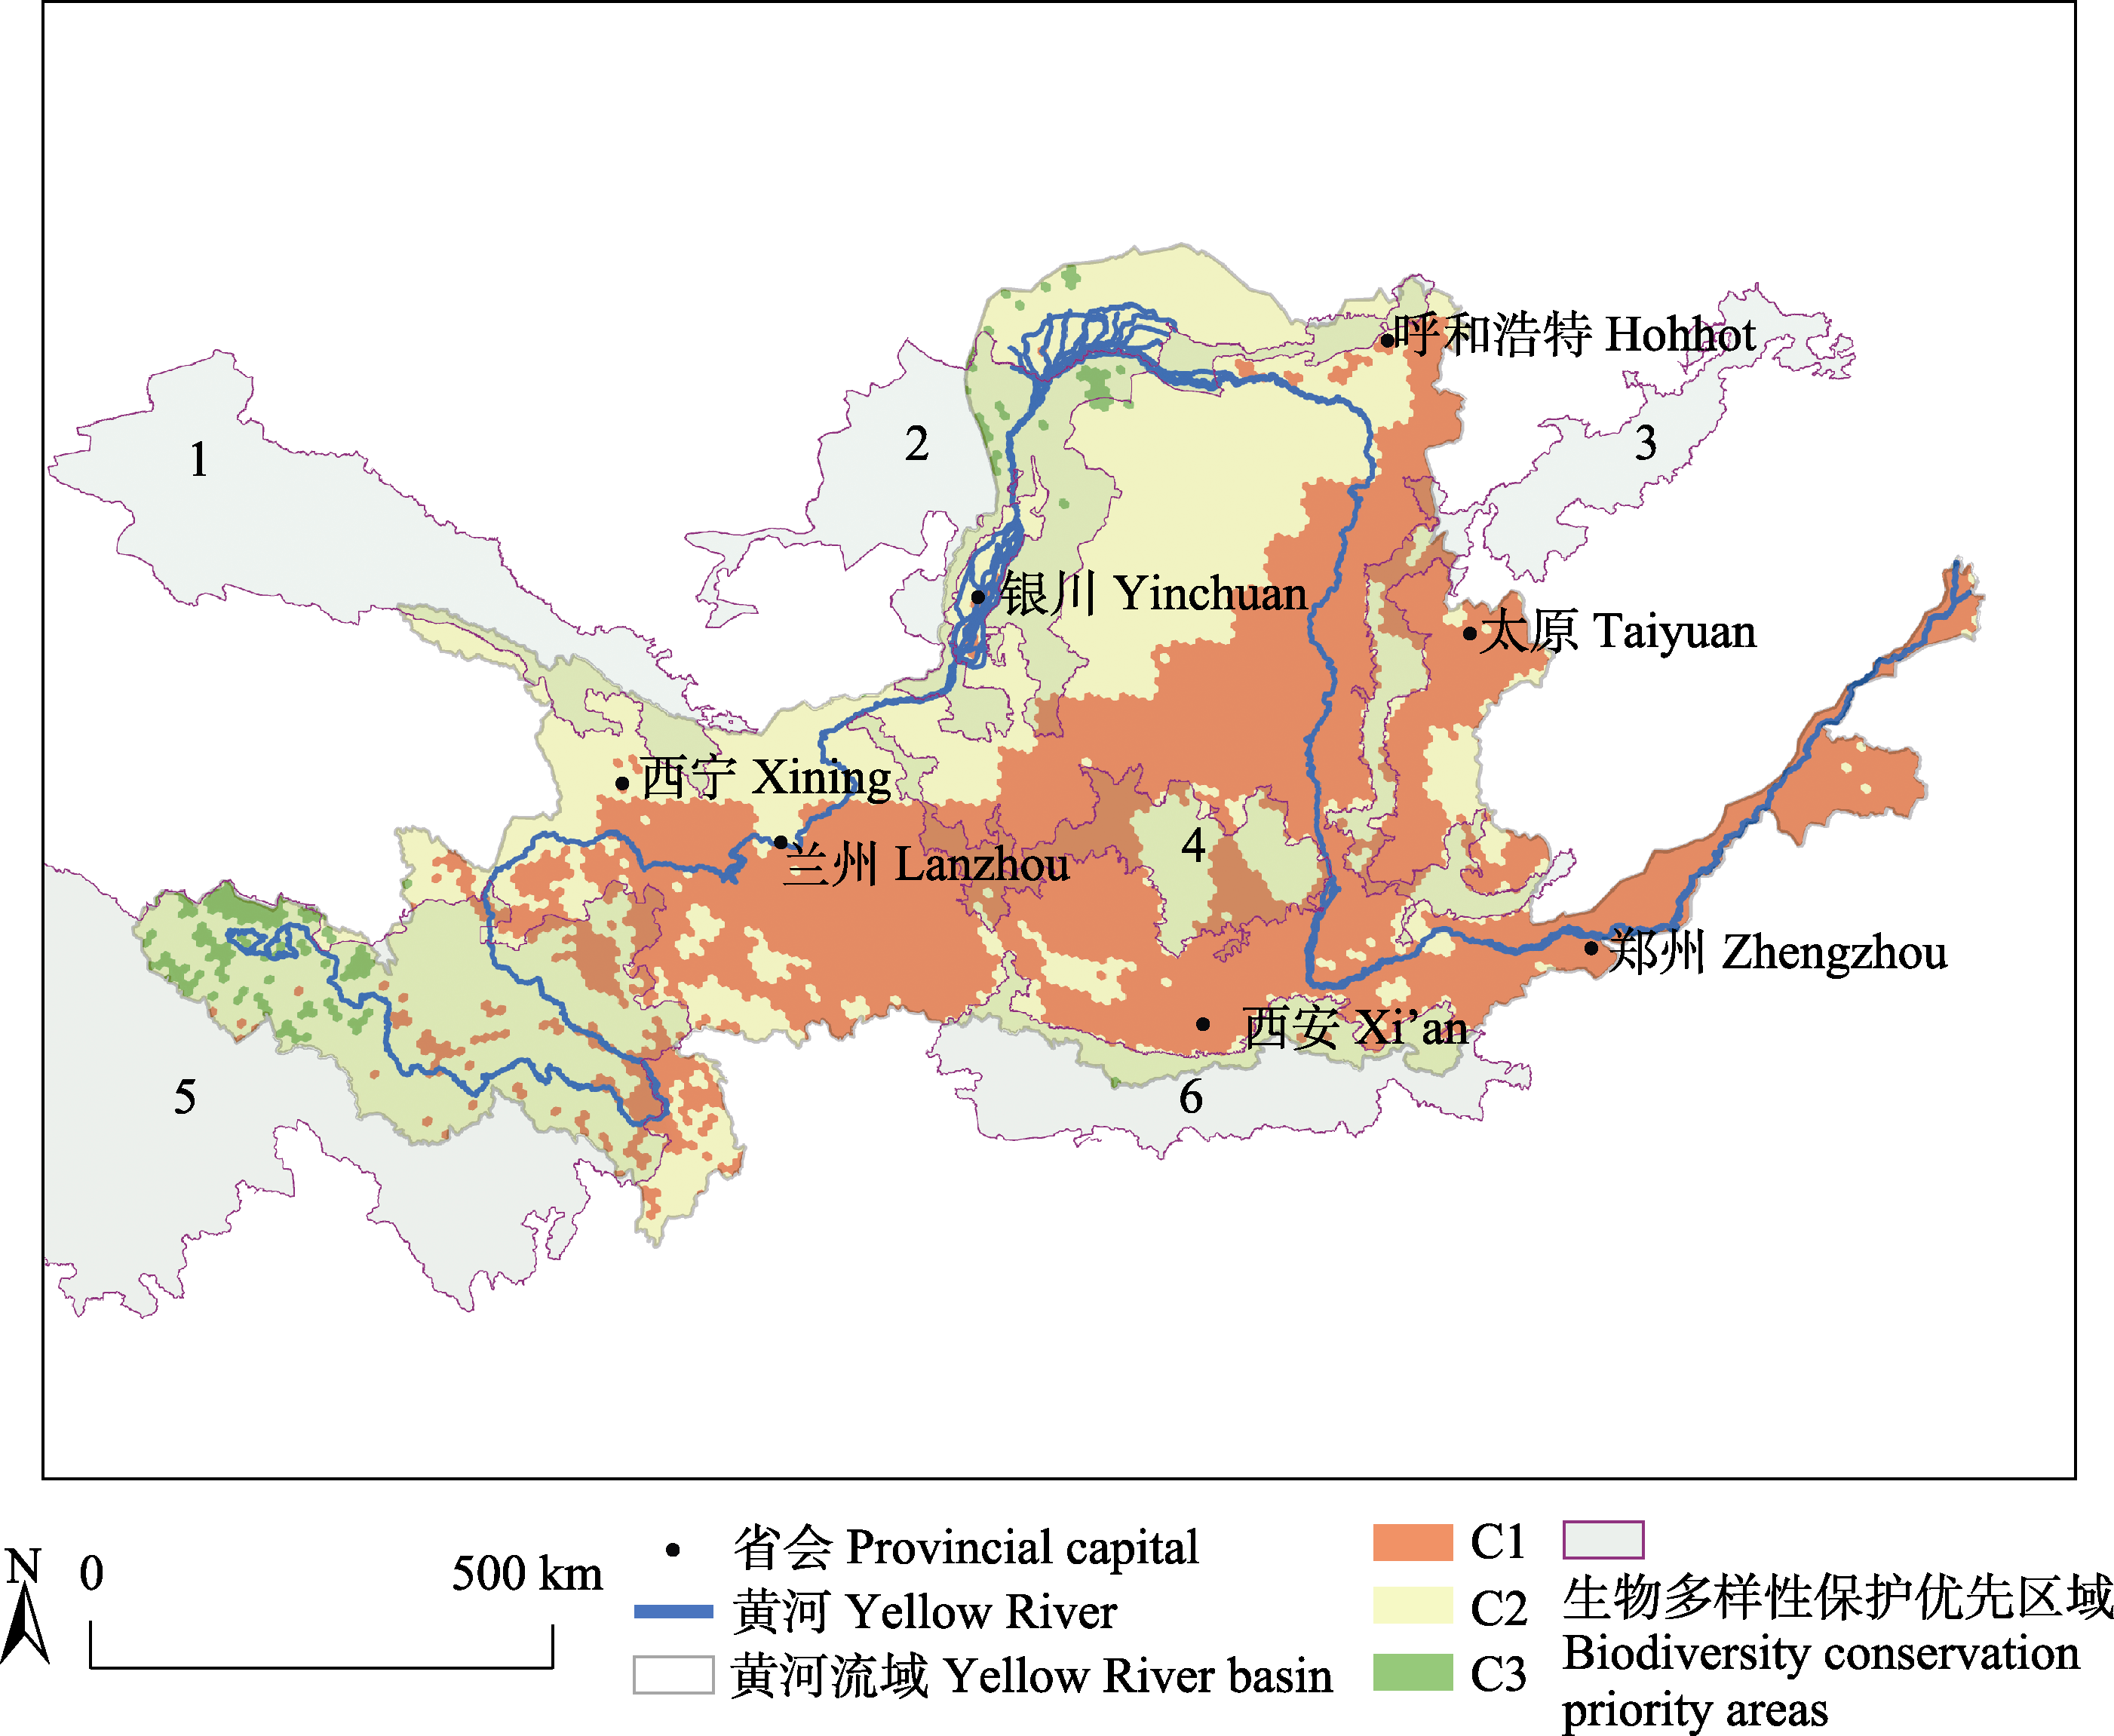 Biodiversity Conservation Strategies For The Yellow River Basin Based On The Three Conditions Framework